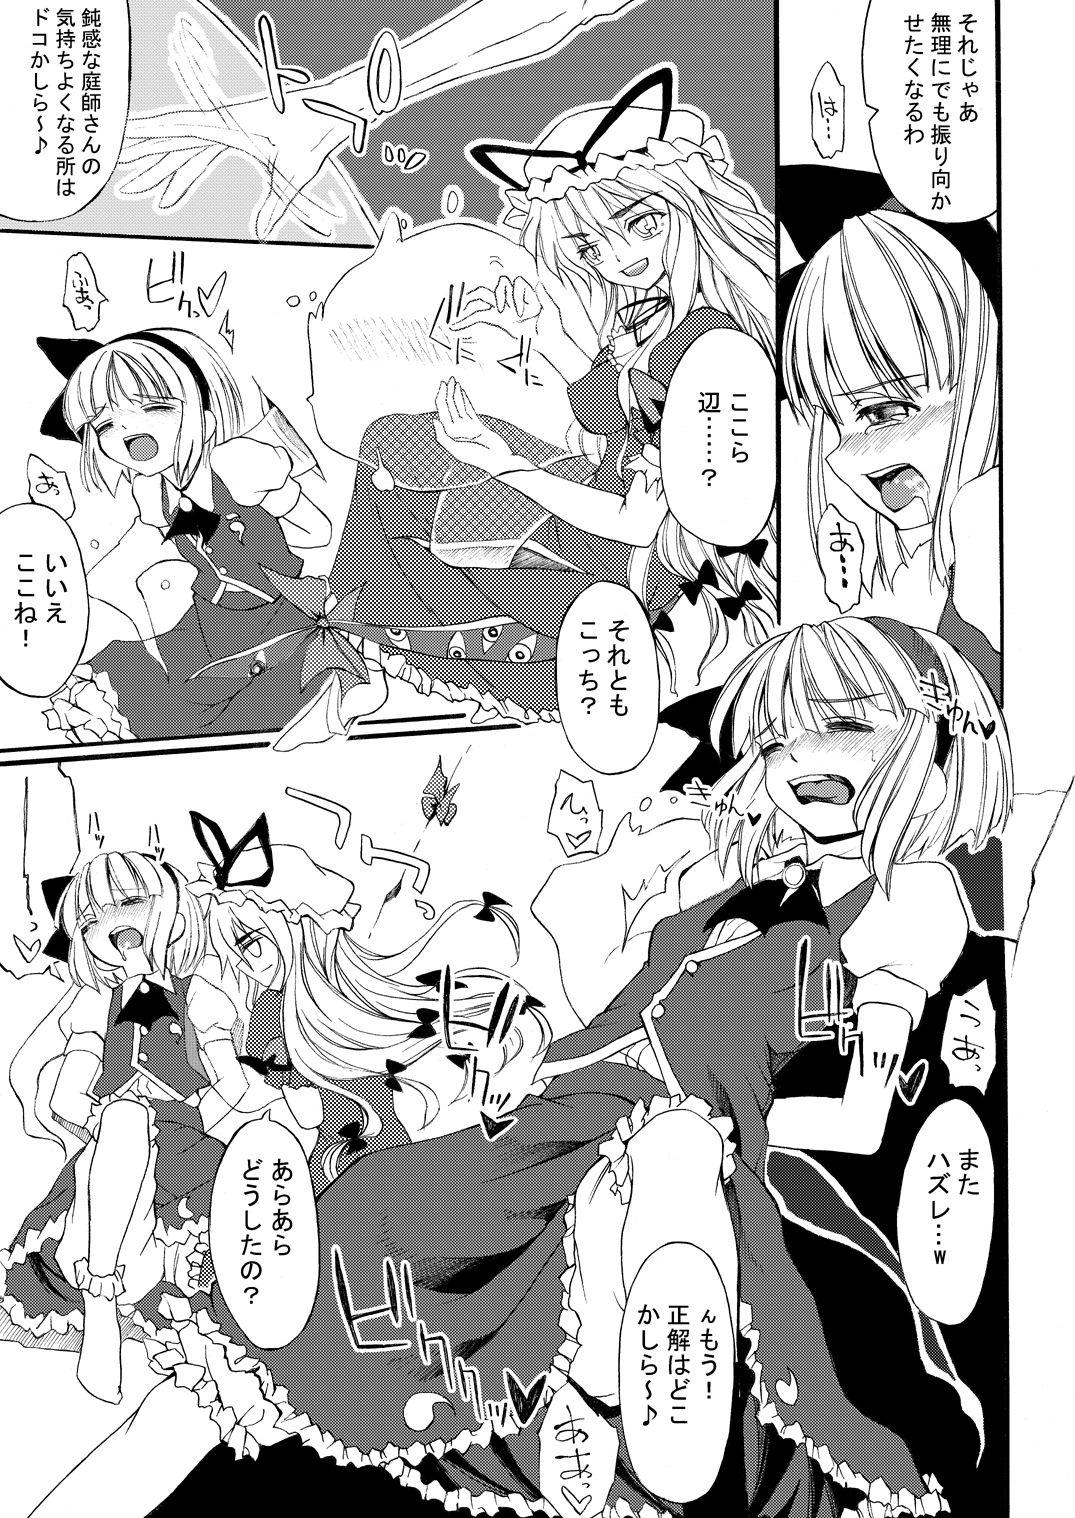 Ride 白玉サクラガサネ/サナギ - Touhou project Best Blowjob - Page 8